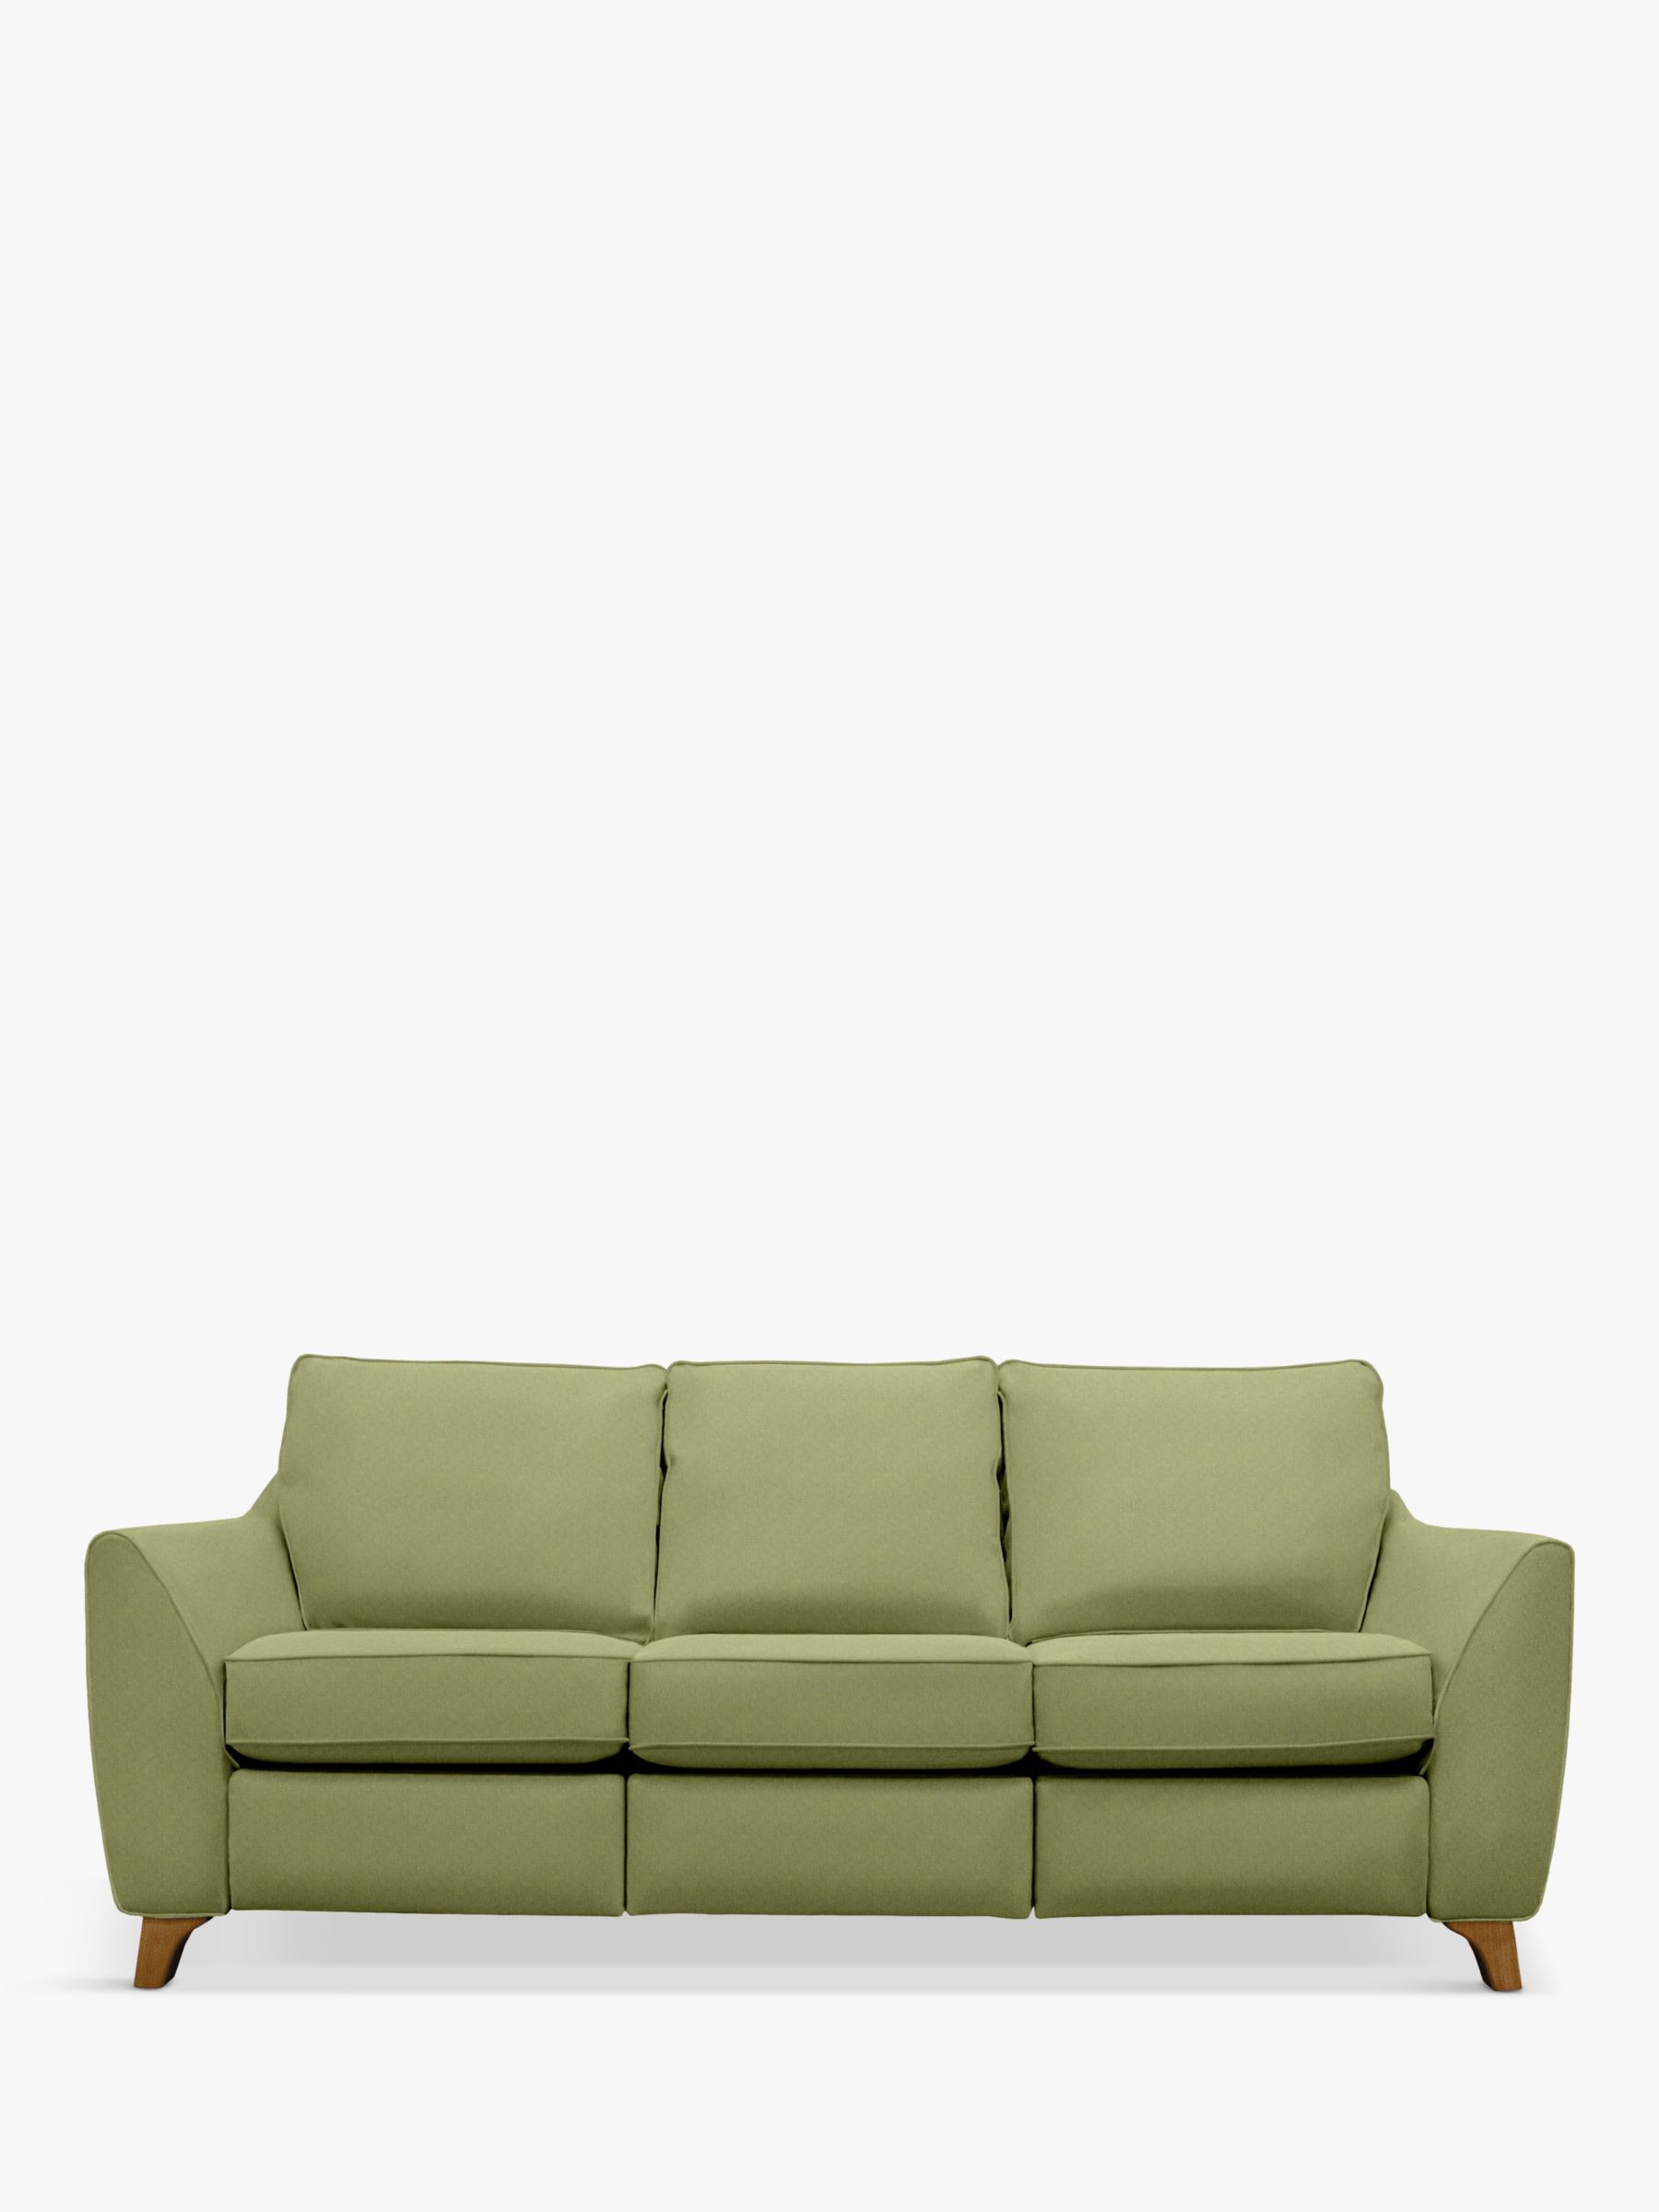 The Sixty Eight Range, G Plan Vintage The Sixty Eight Large 3 Seater Sofa, Marl Green